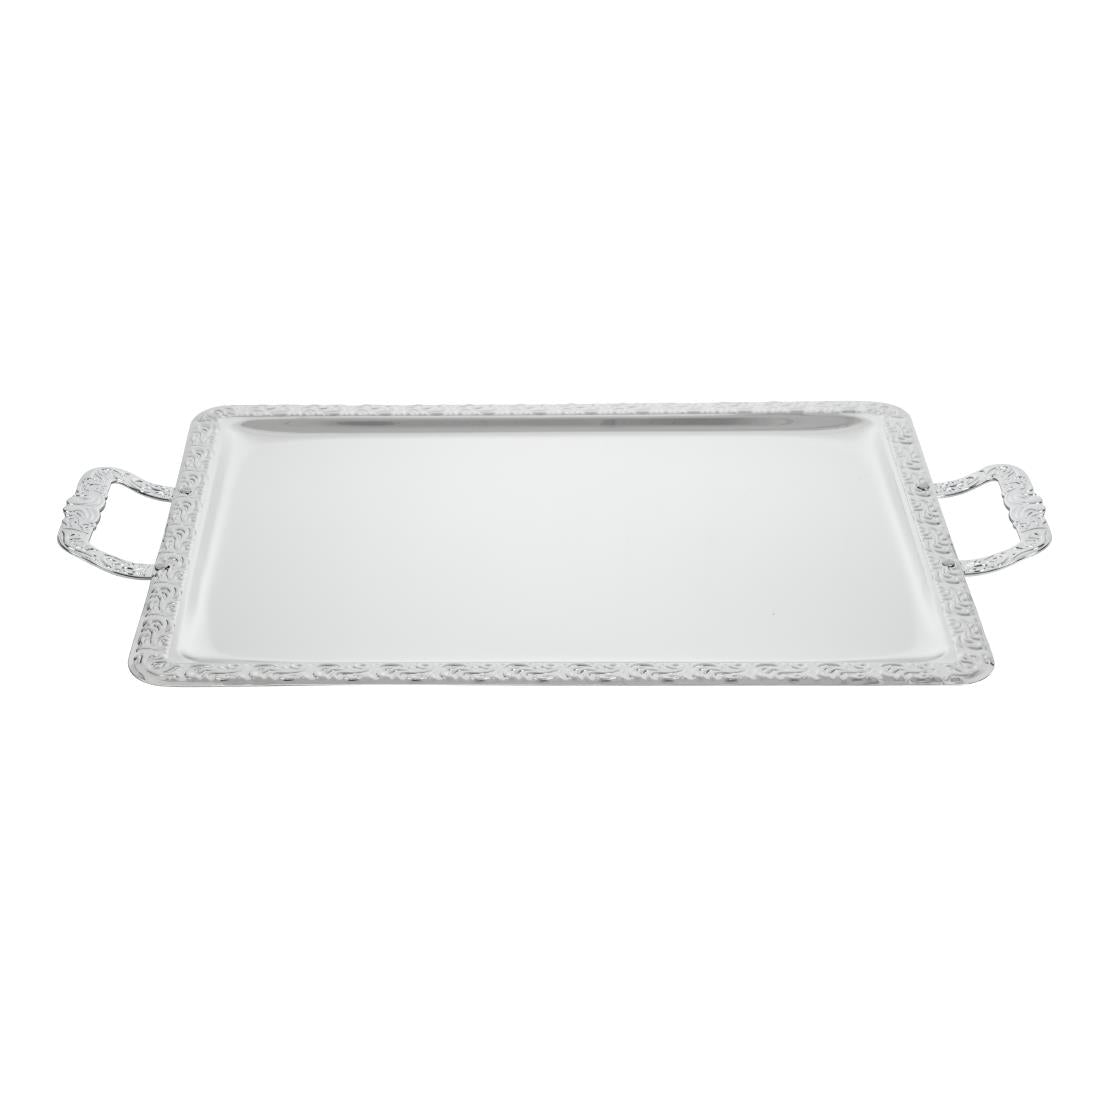 APS Stainless Steel Rectangular Handled Service Tray 600mm JD Catering Equipment Solutions Ltd